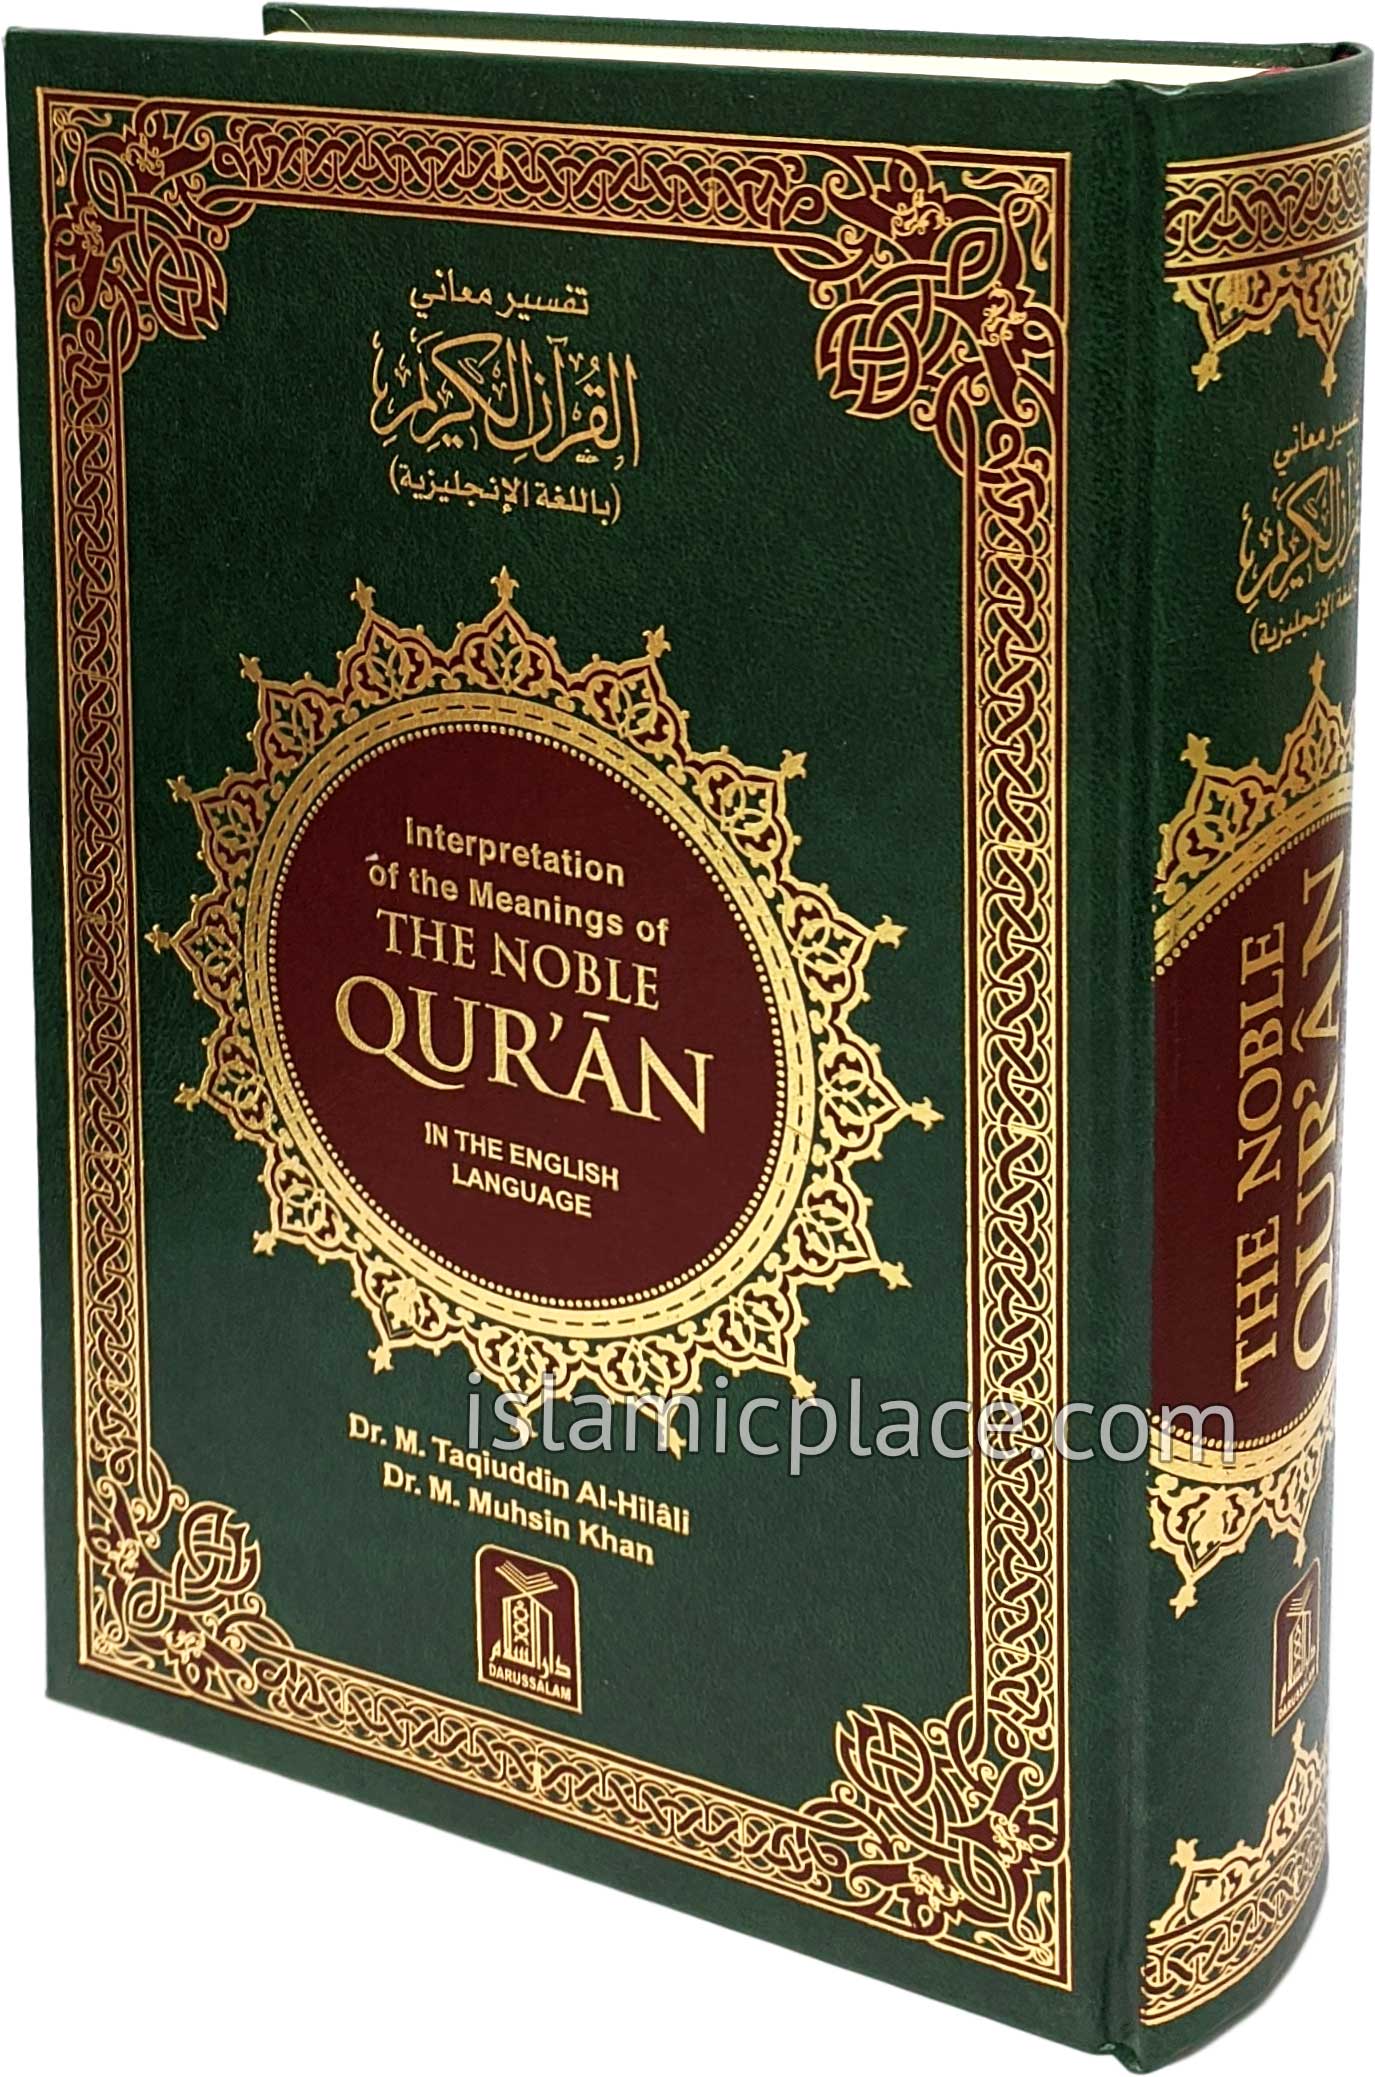 Noble Quran Arabic and English (HB XL size approx 7"x10")